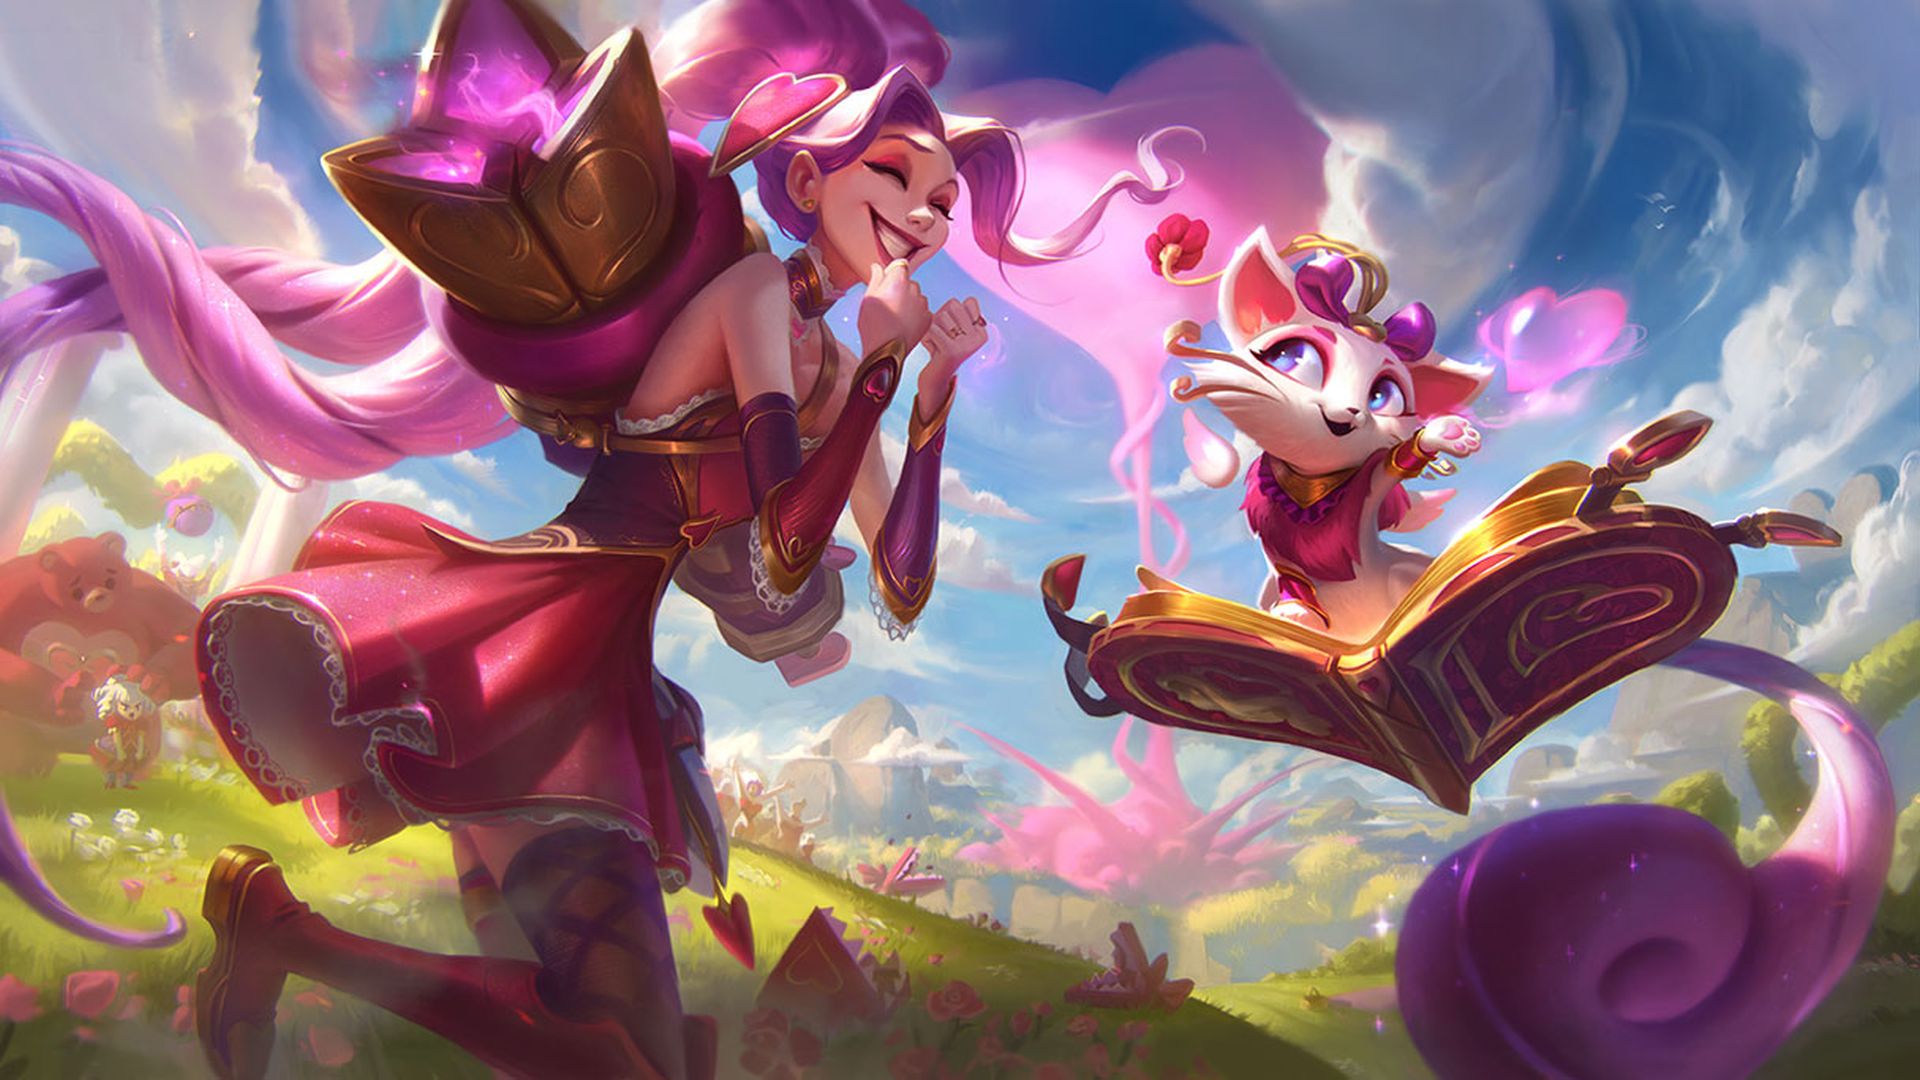 Check out the League of Legends Valentine’s Day collection PCGamesN